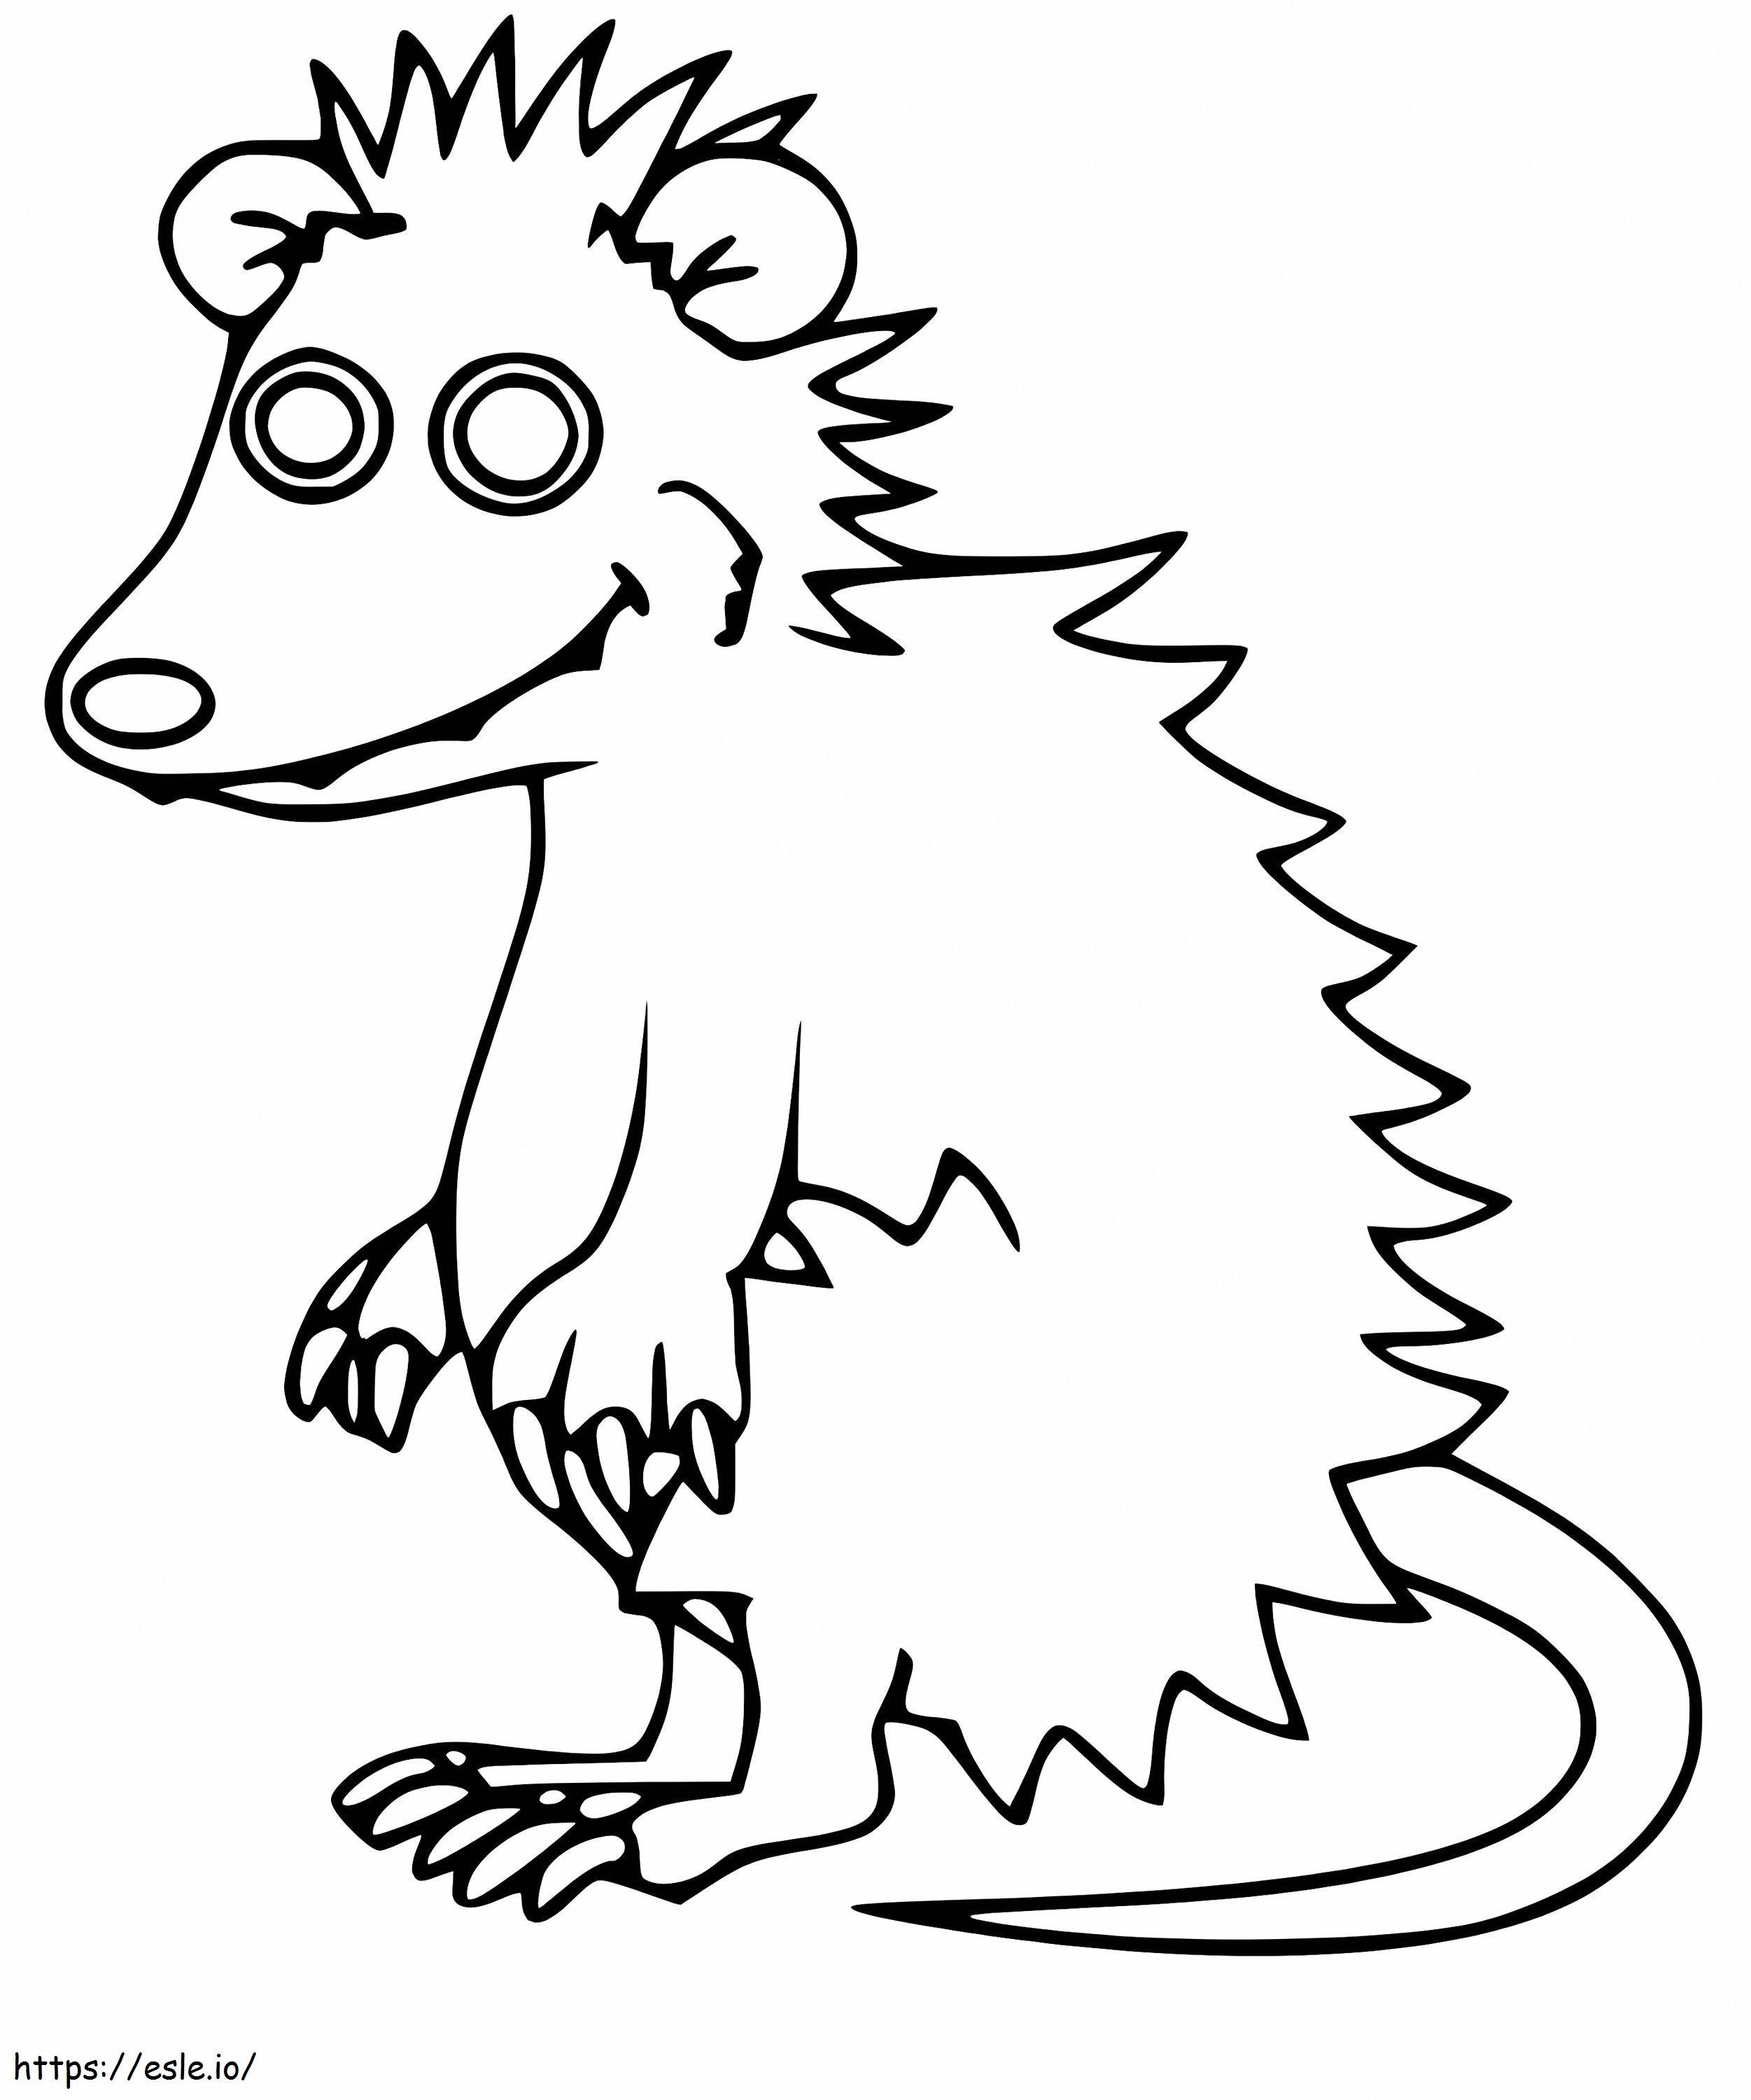 Opposite Cartoon coloring page